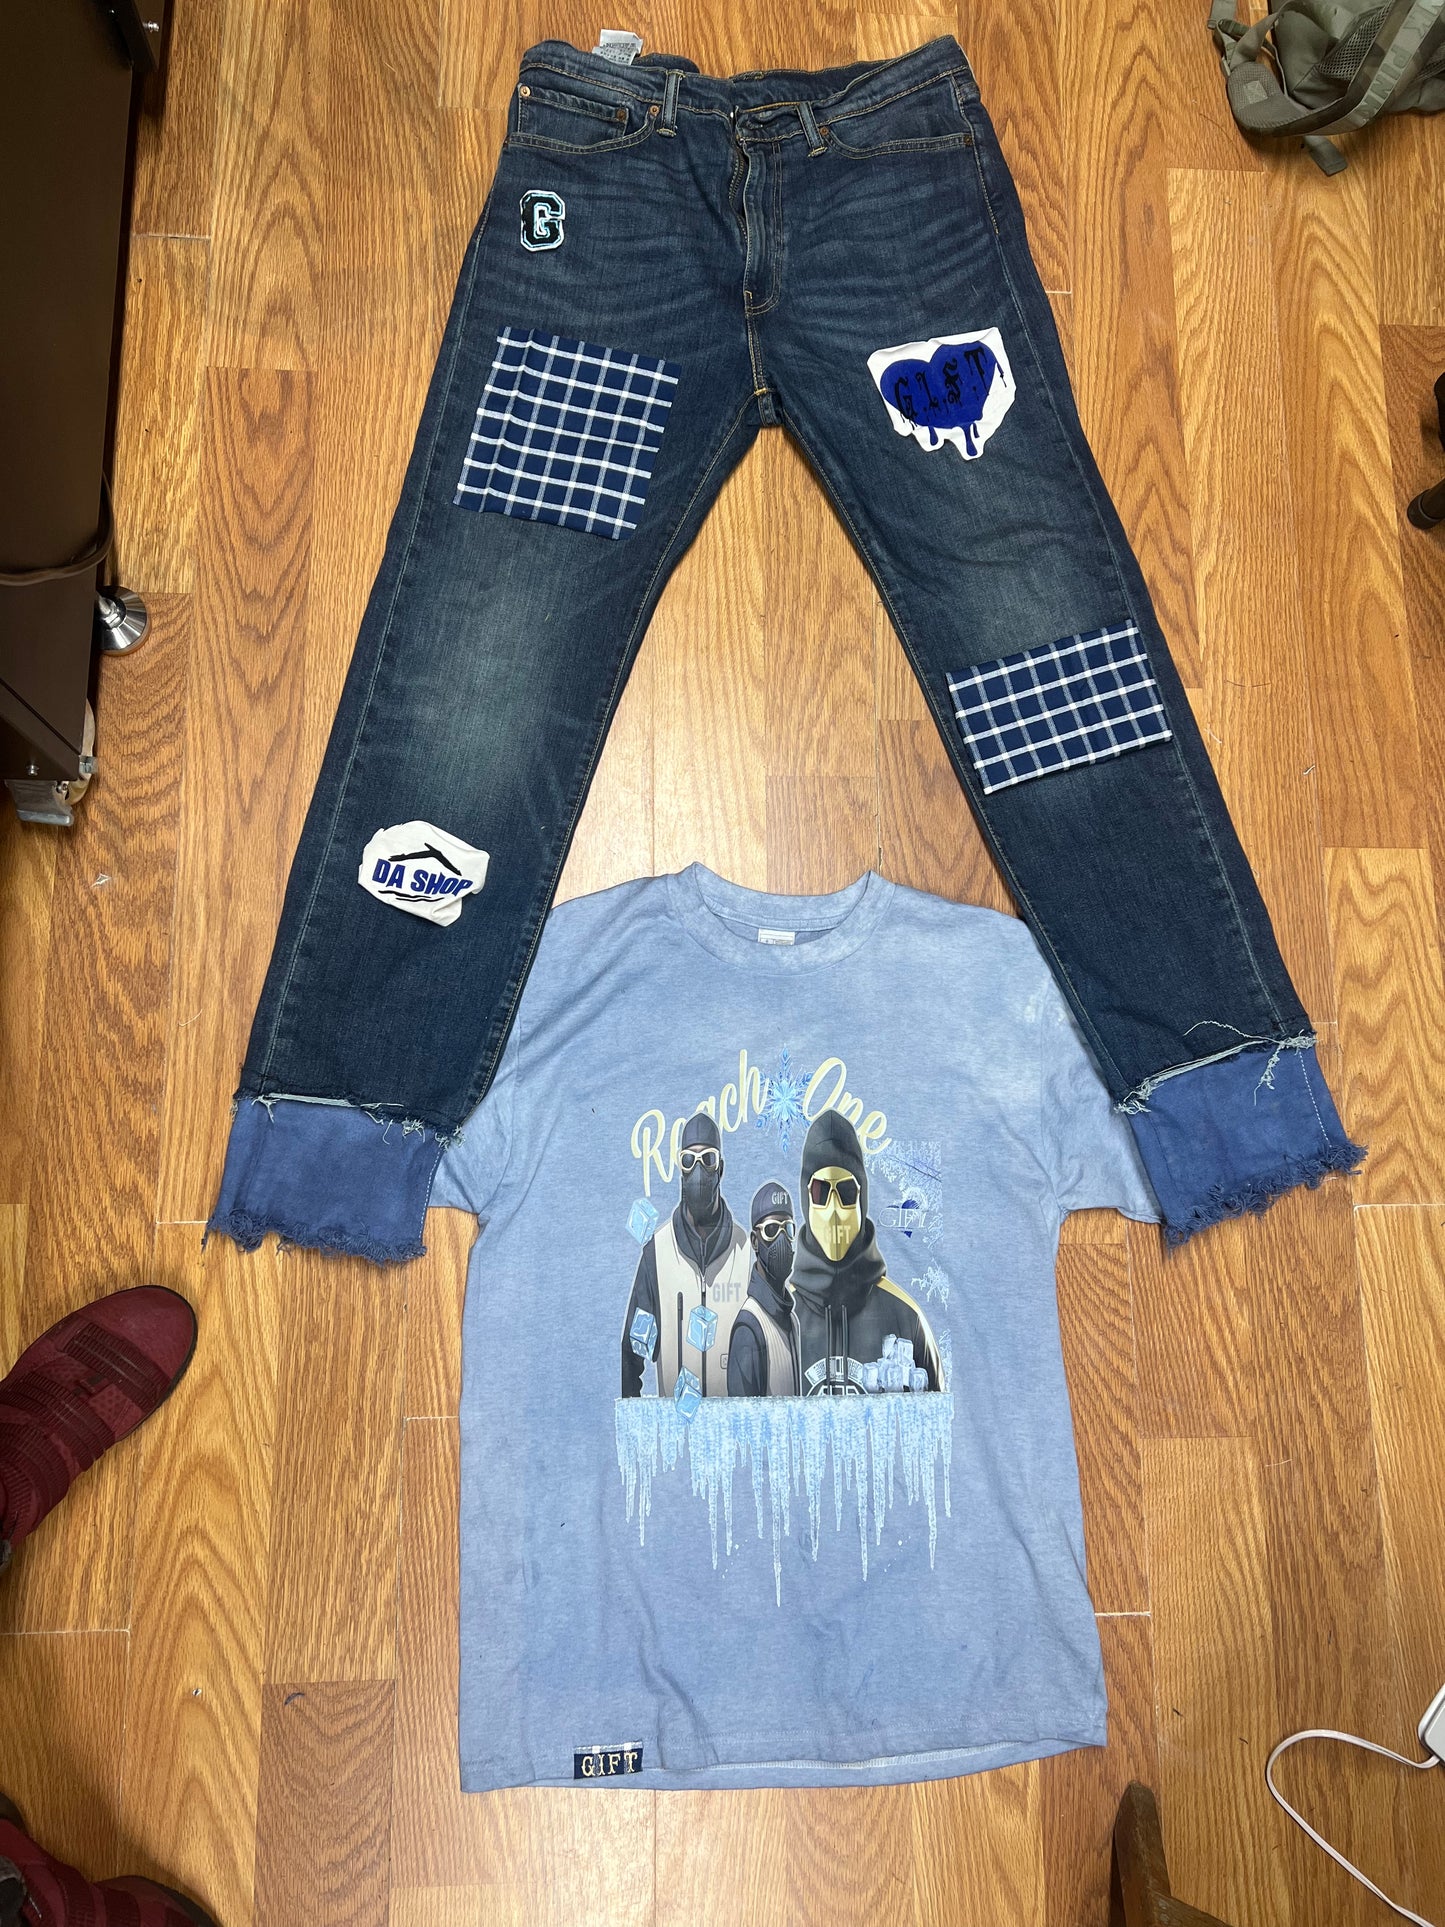 Sub Cold GIFT jeans and shirt Combo GAB 1 of 1